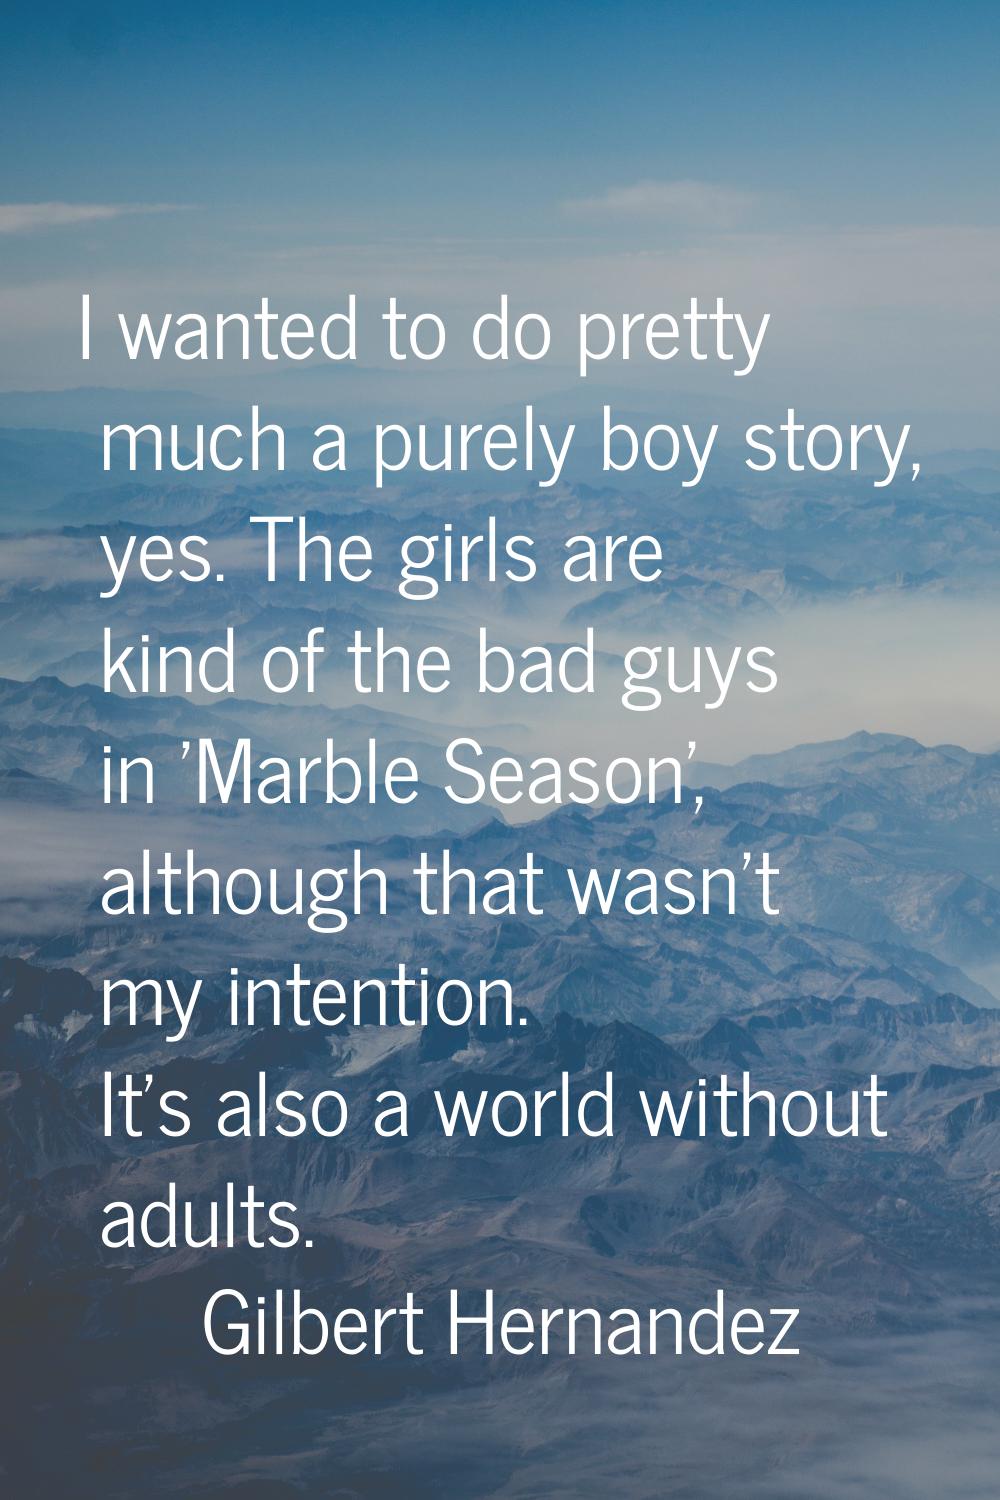 I wanted to do pretty much a purely boy story, yes. The girls are kind of the bad guys in 'Marble S